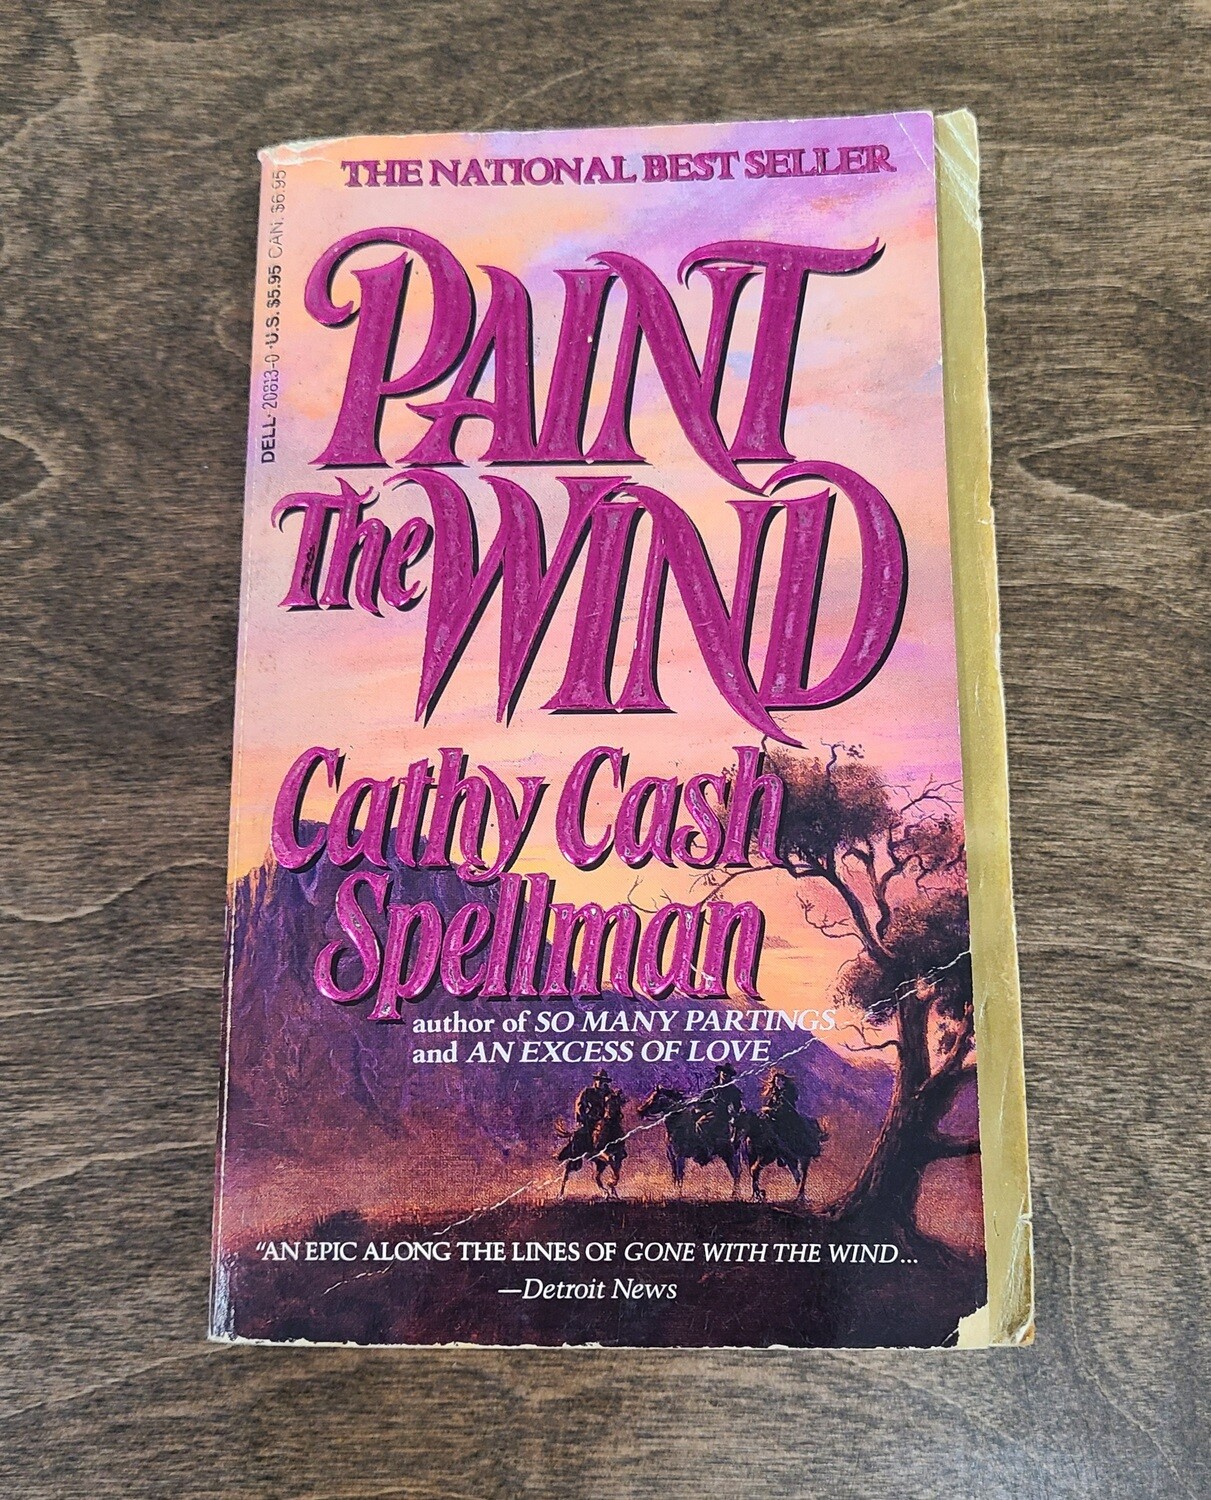 Paint the Wind by Cathy Cash Spellman